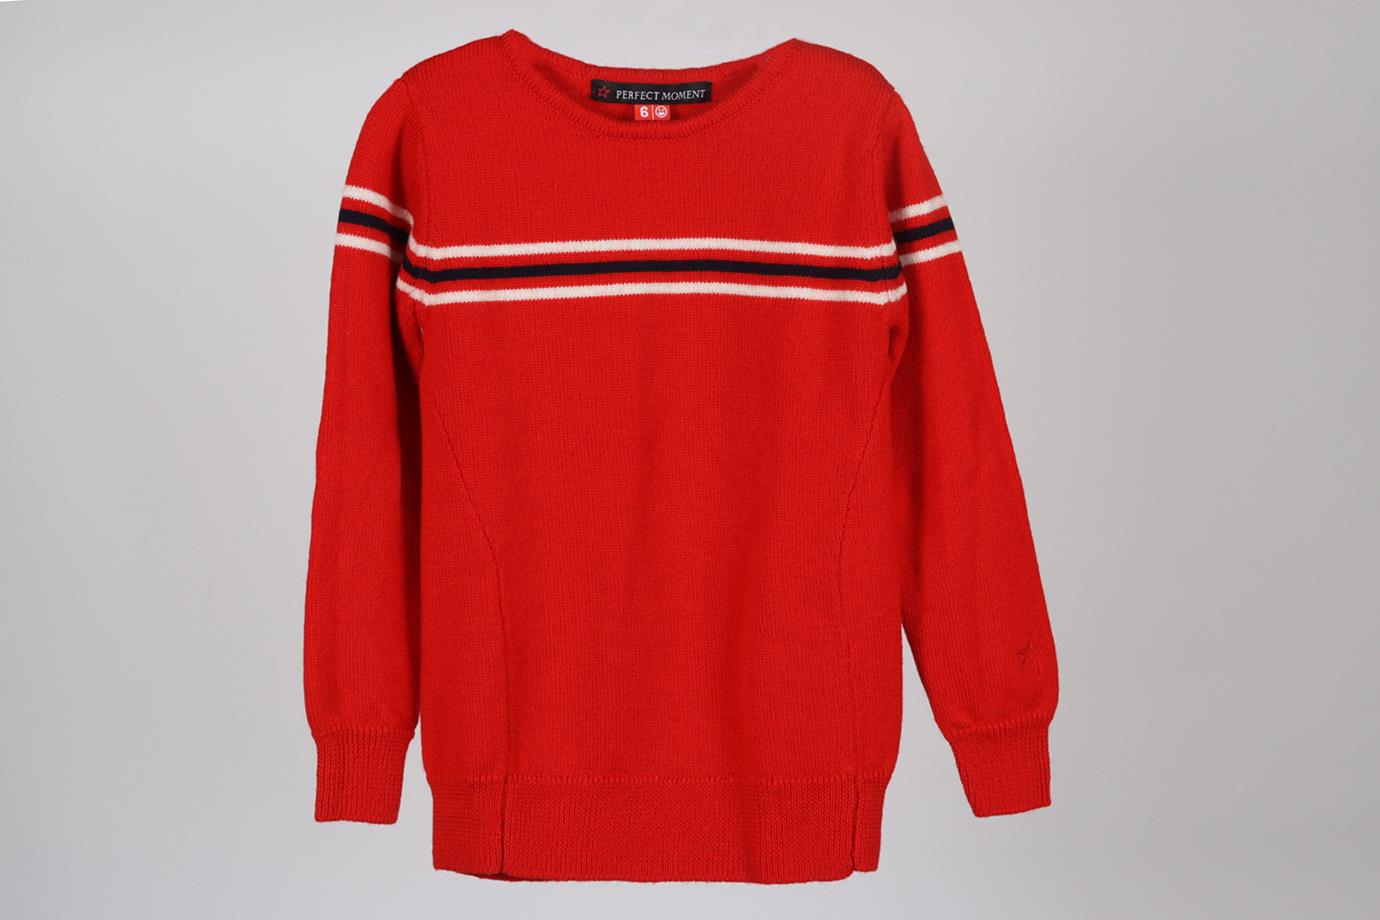 PERFECT MOMENT KIDS BOYS WOOL SWEATER 6 YEARS